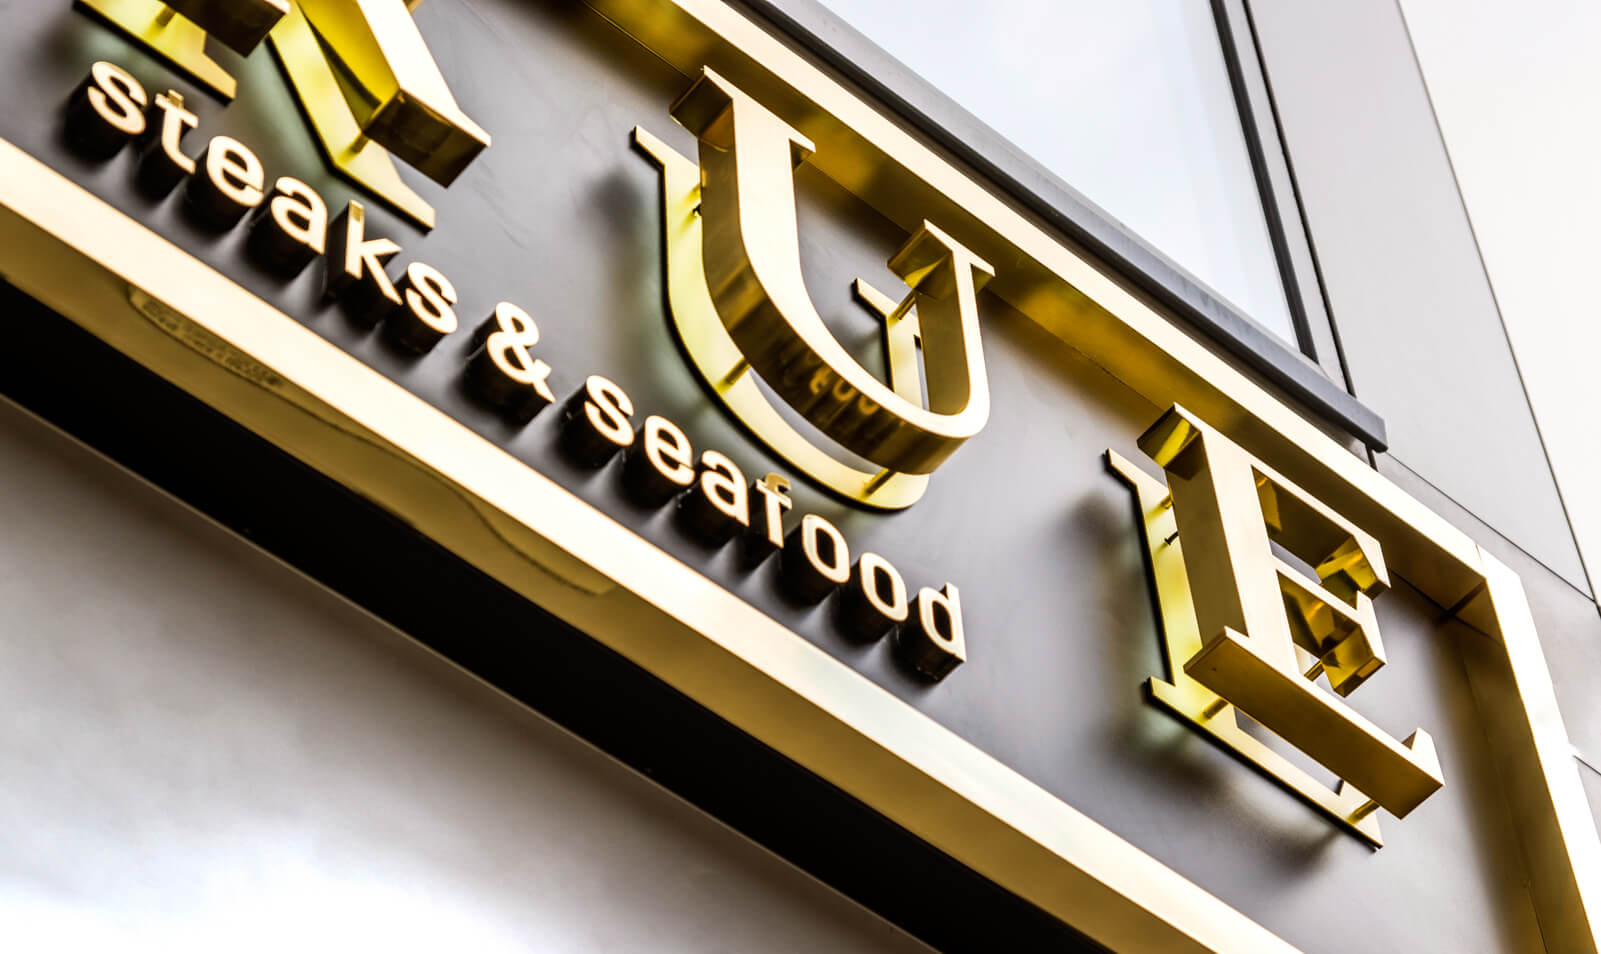 TRUE - True - external sign with golden letters made of stainless steel